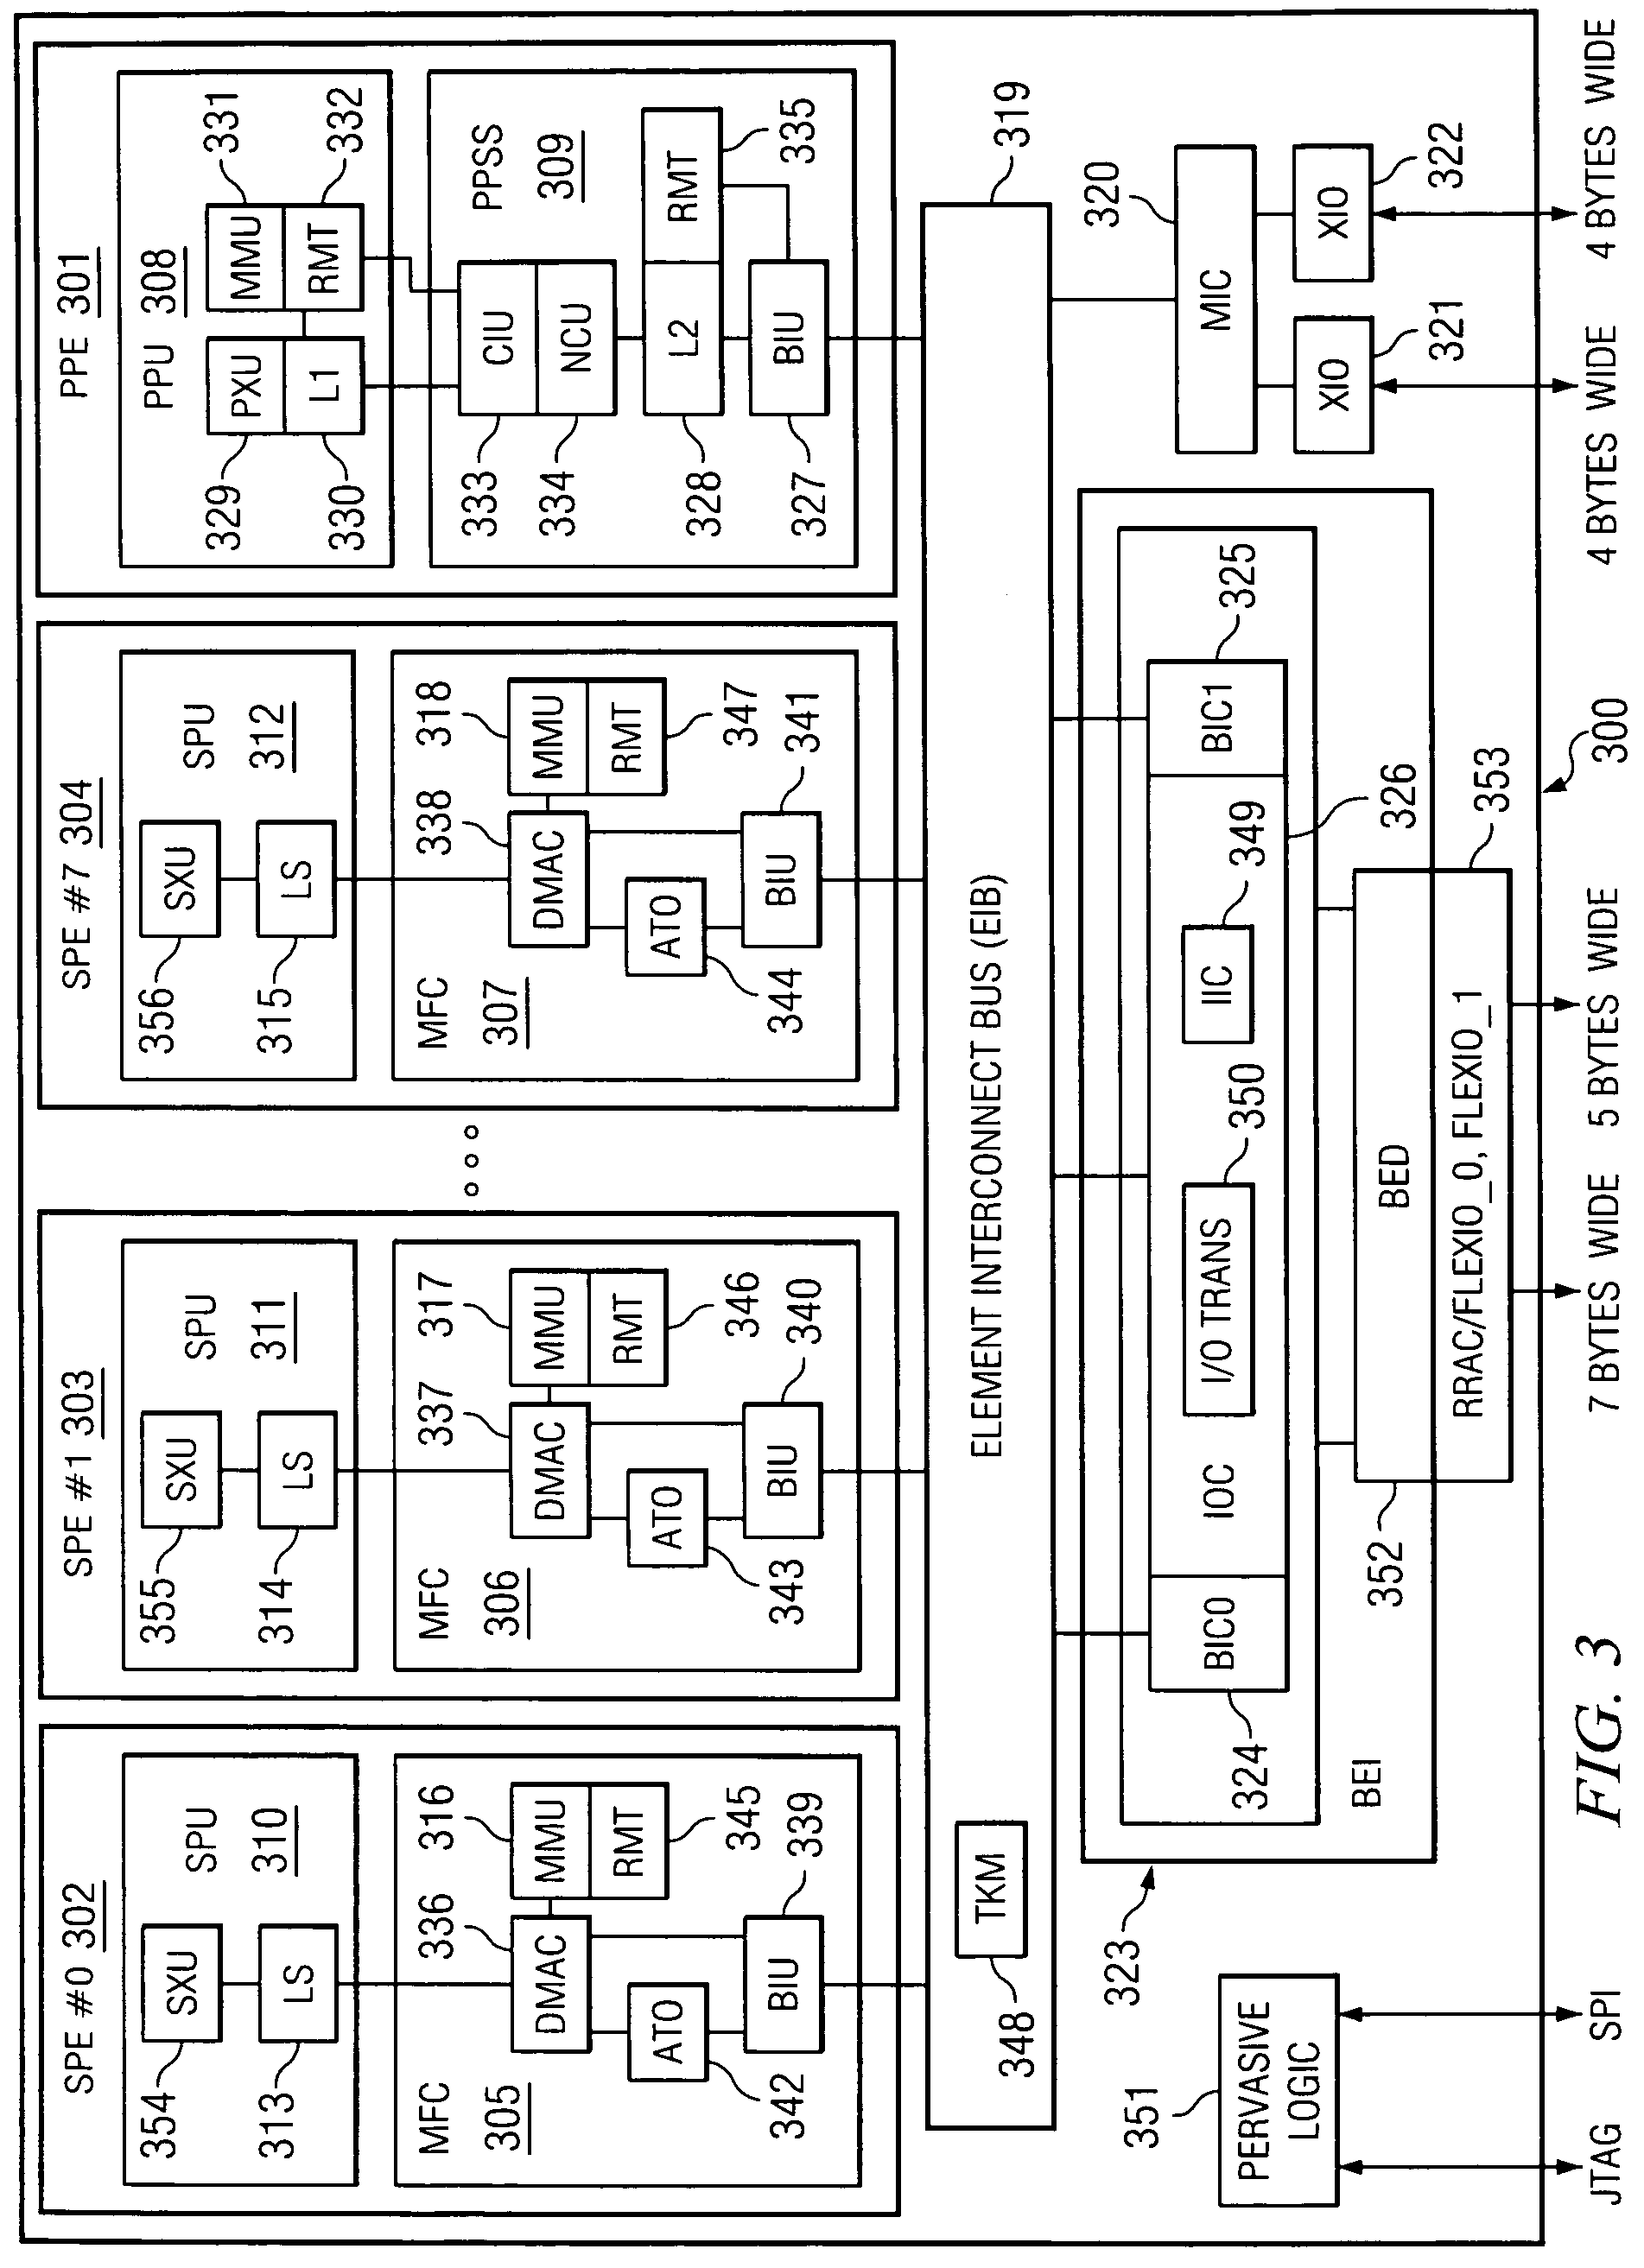 Generation of software thermal profiles executed on a set of processors using thermal sampling